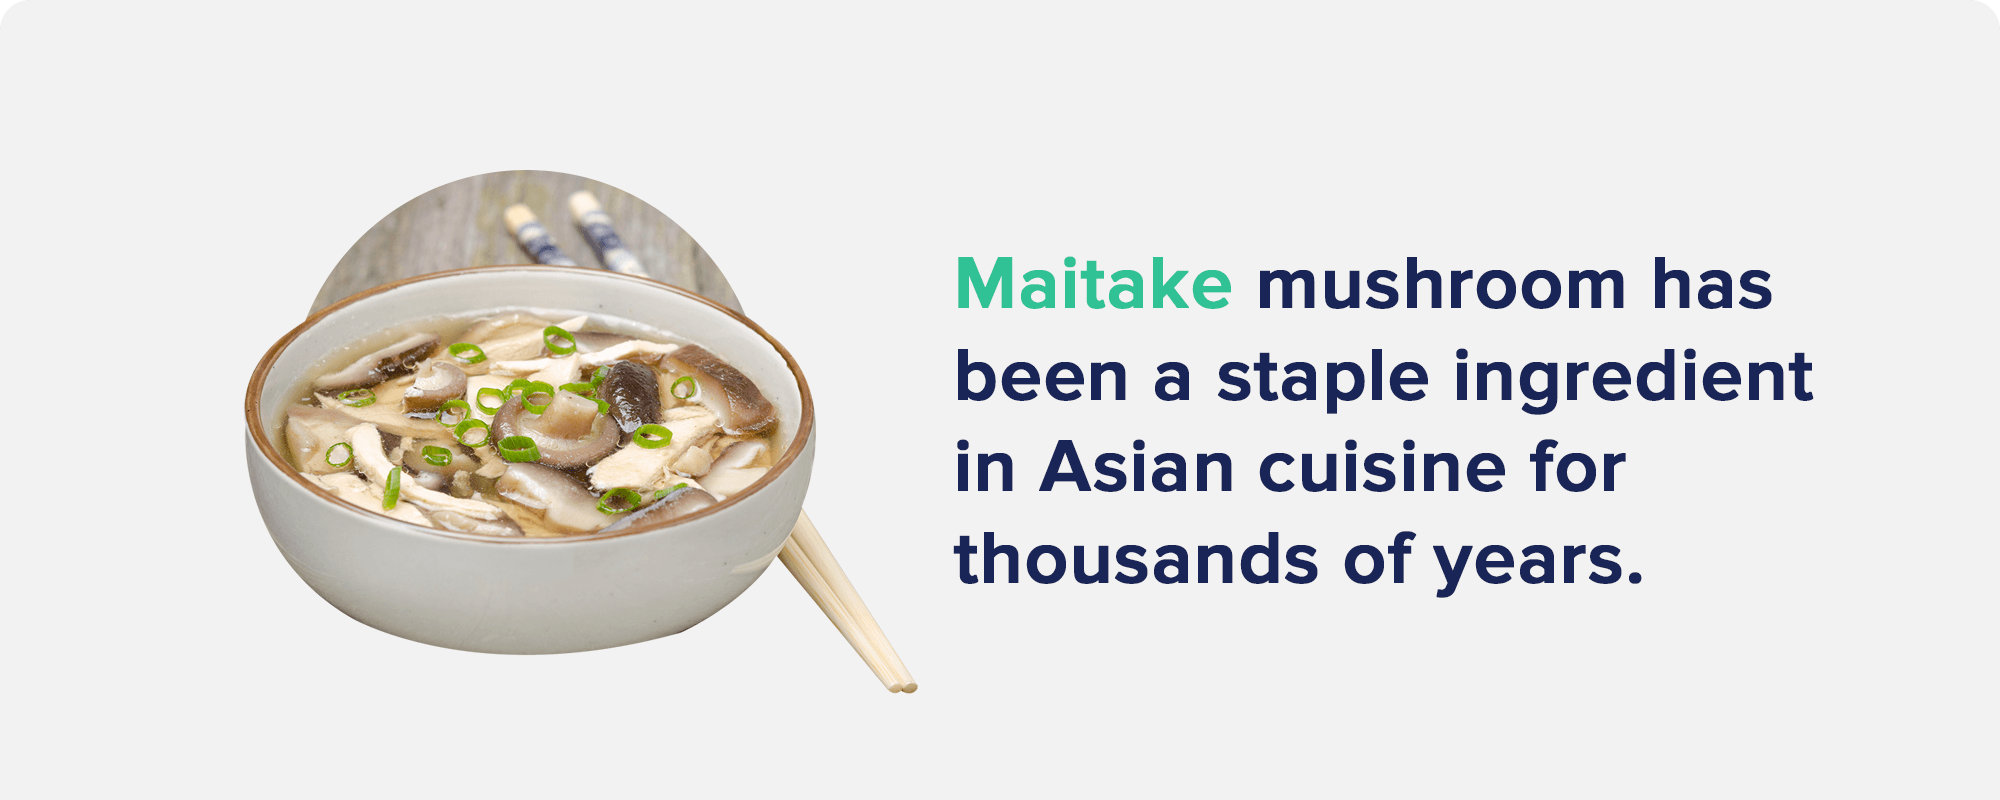 Maitake Mushroom has been a staple ingredient in Asian cuisine for thousands of years.